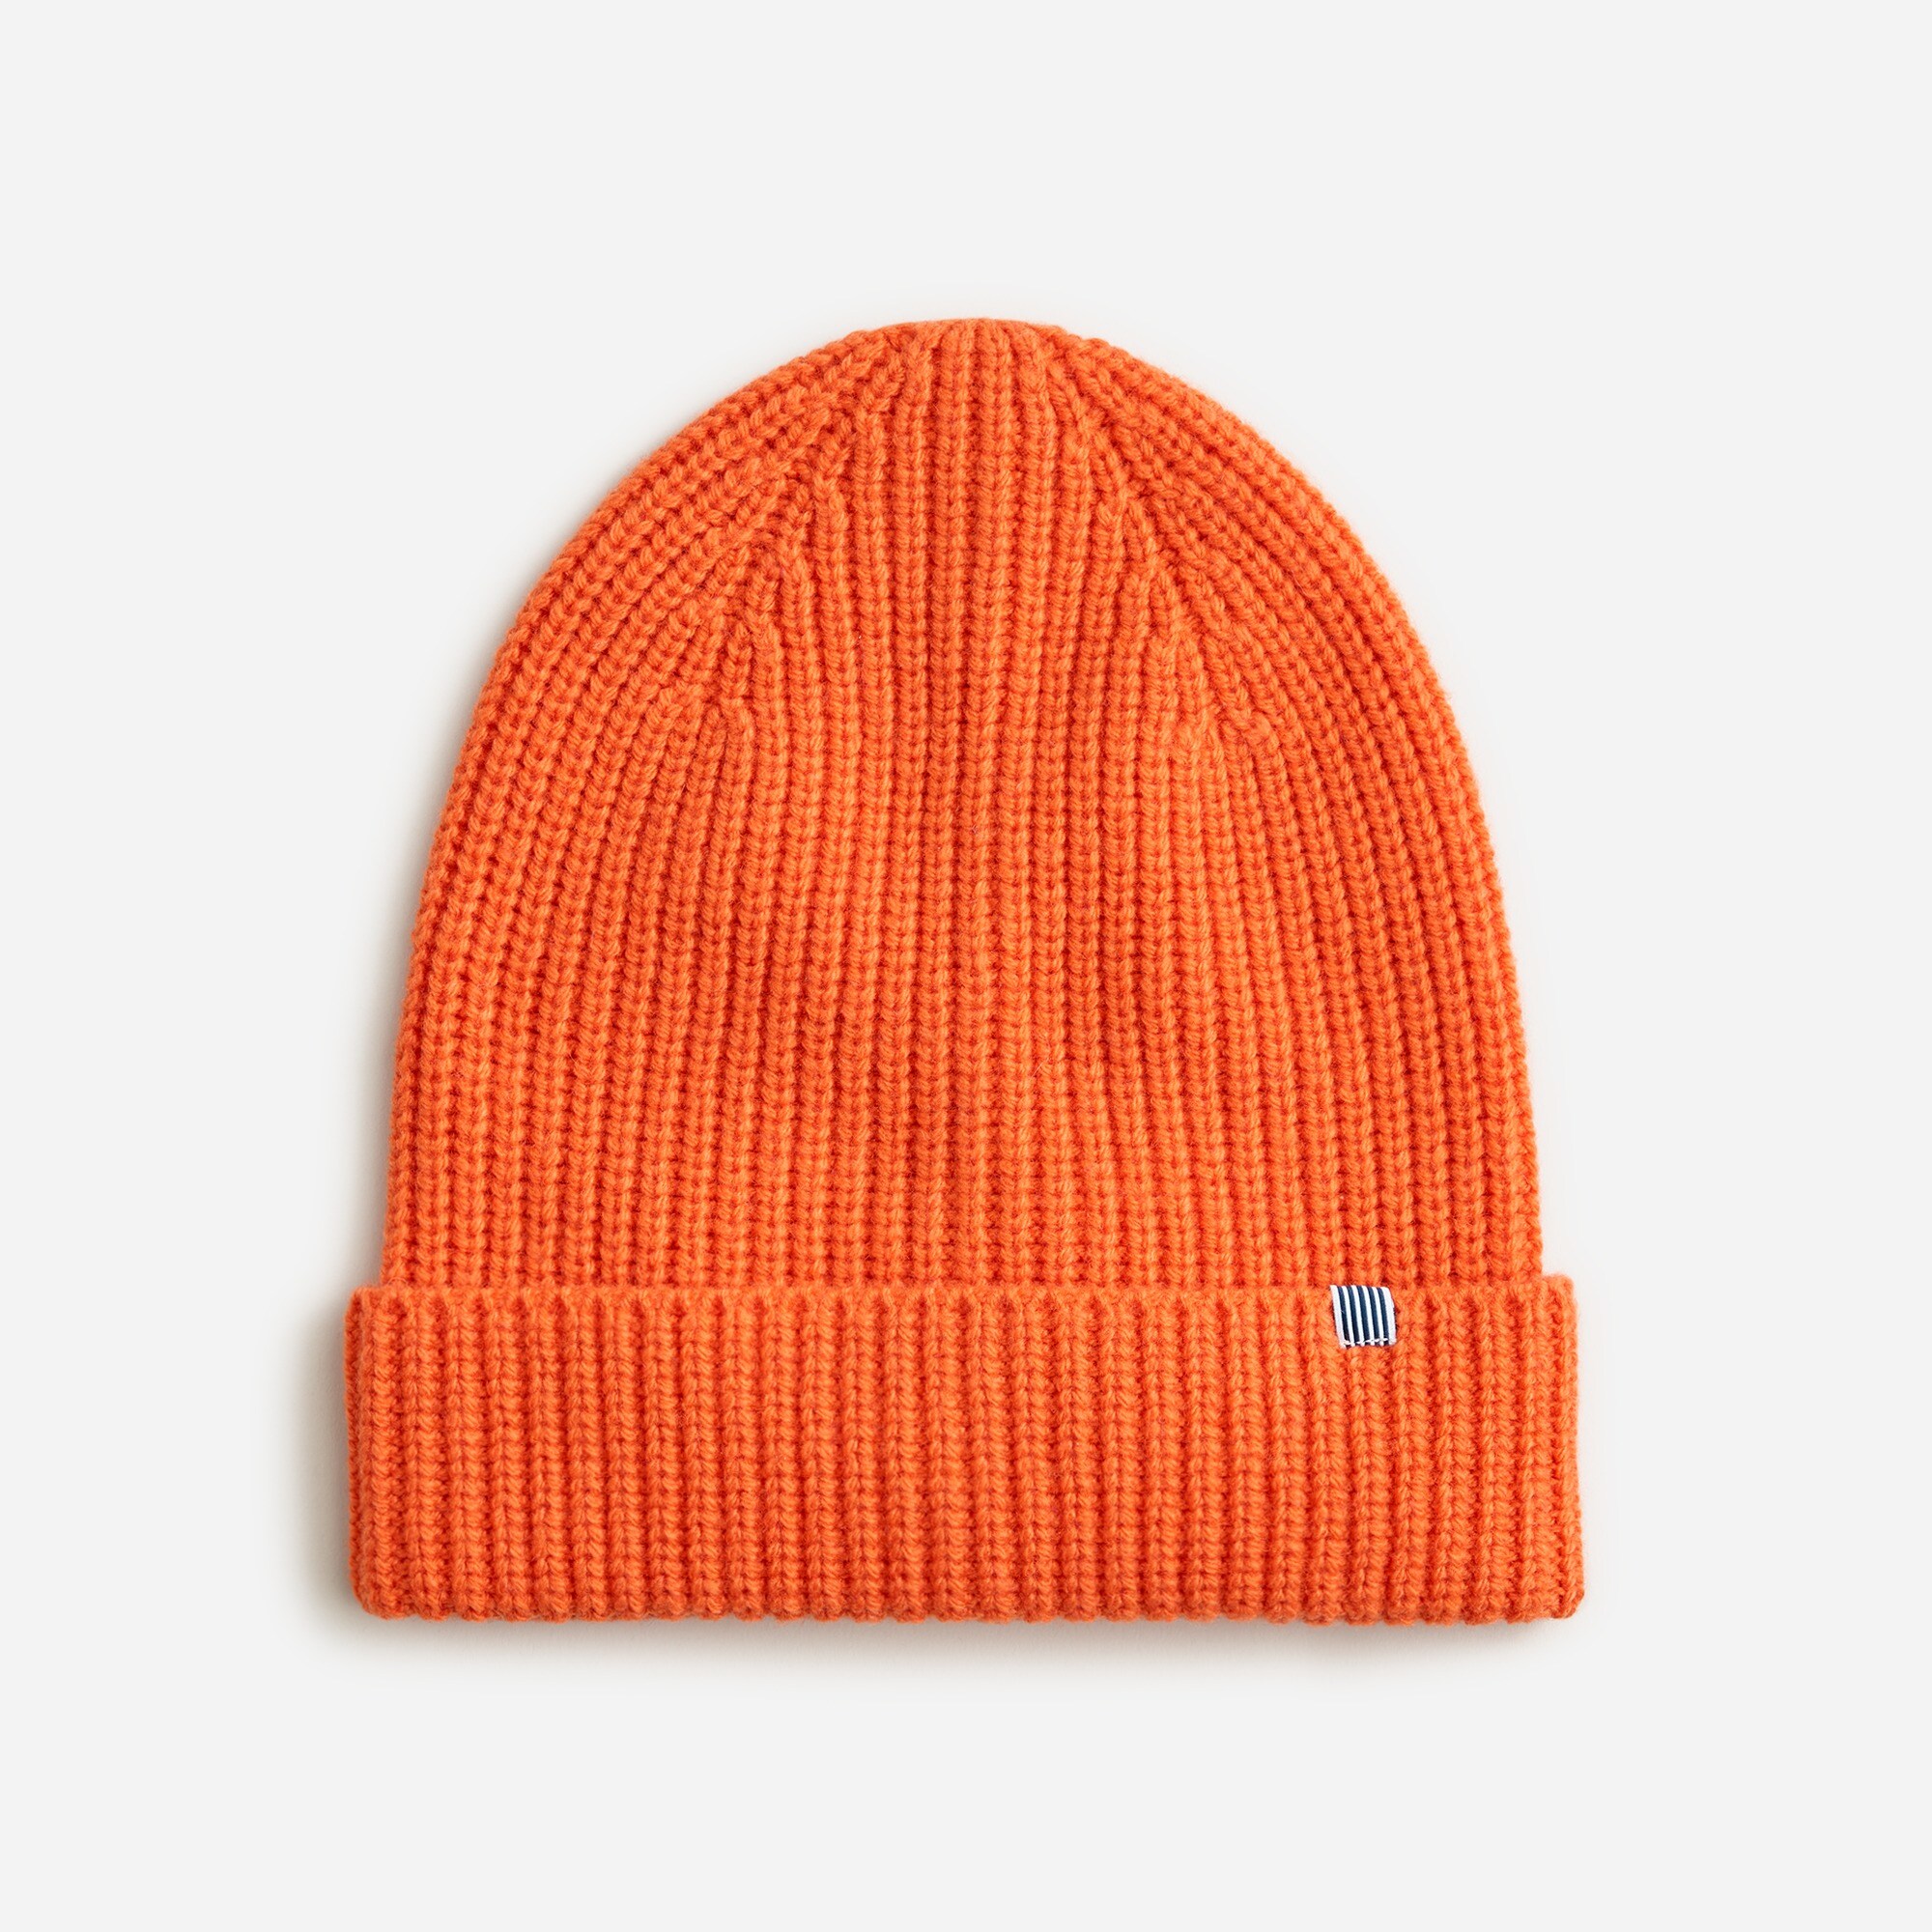  KID by crewcuts classic ribbed beanie